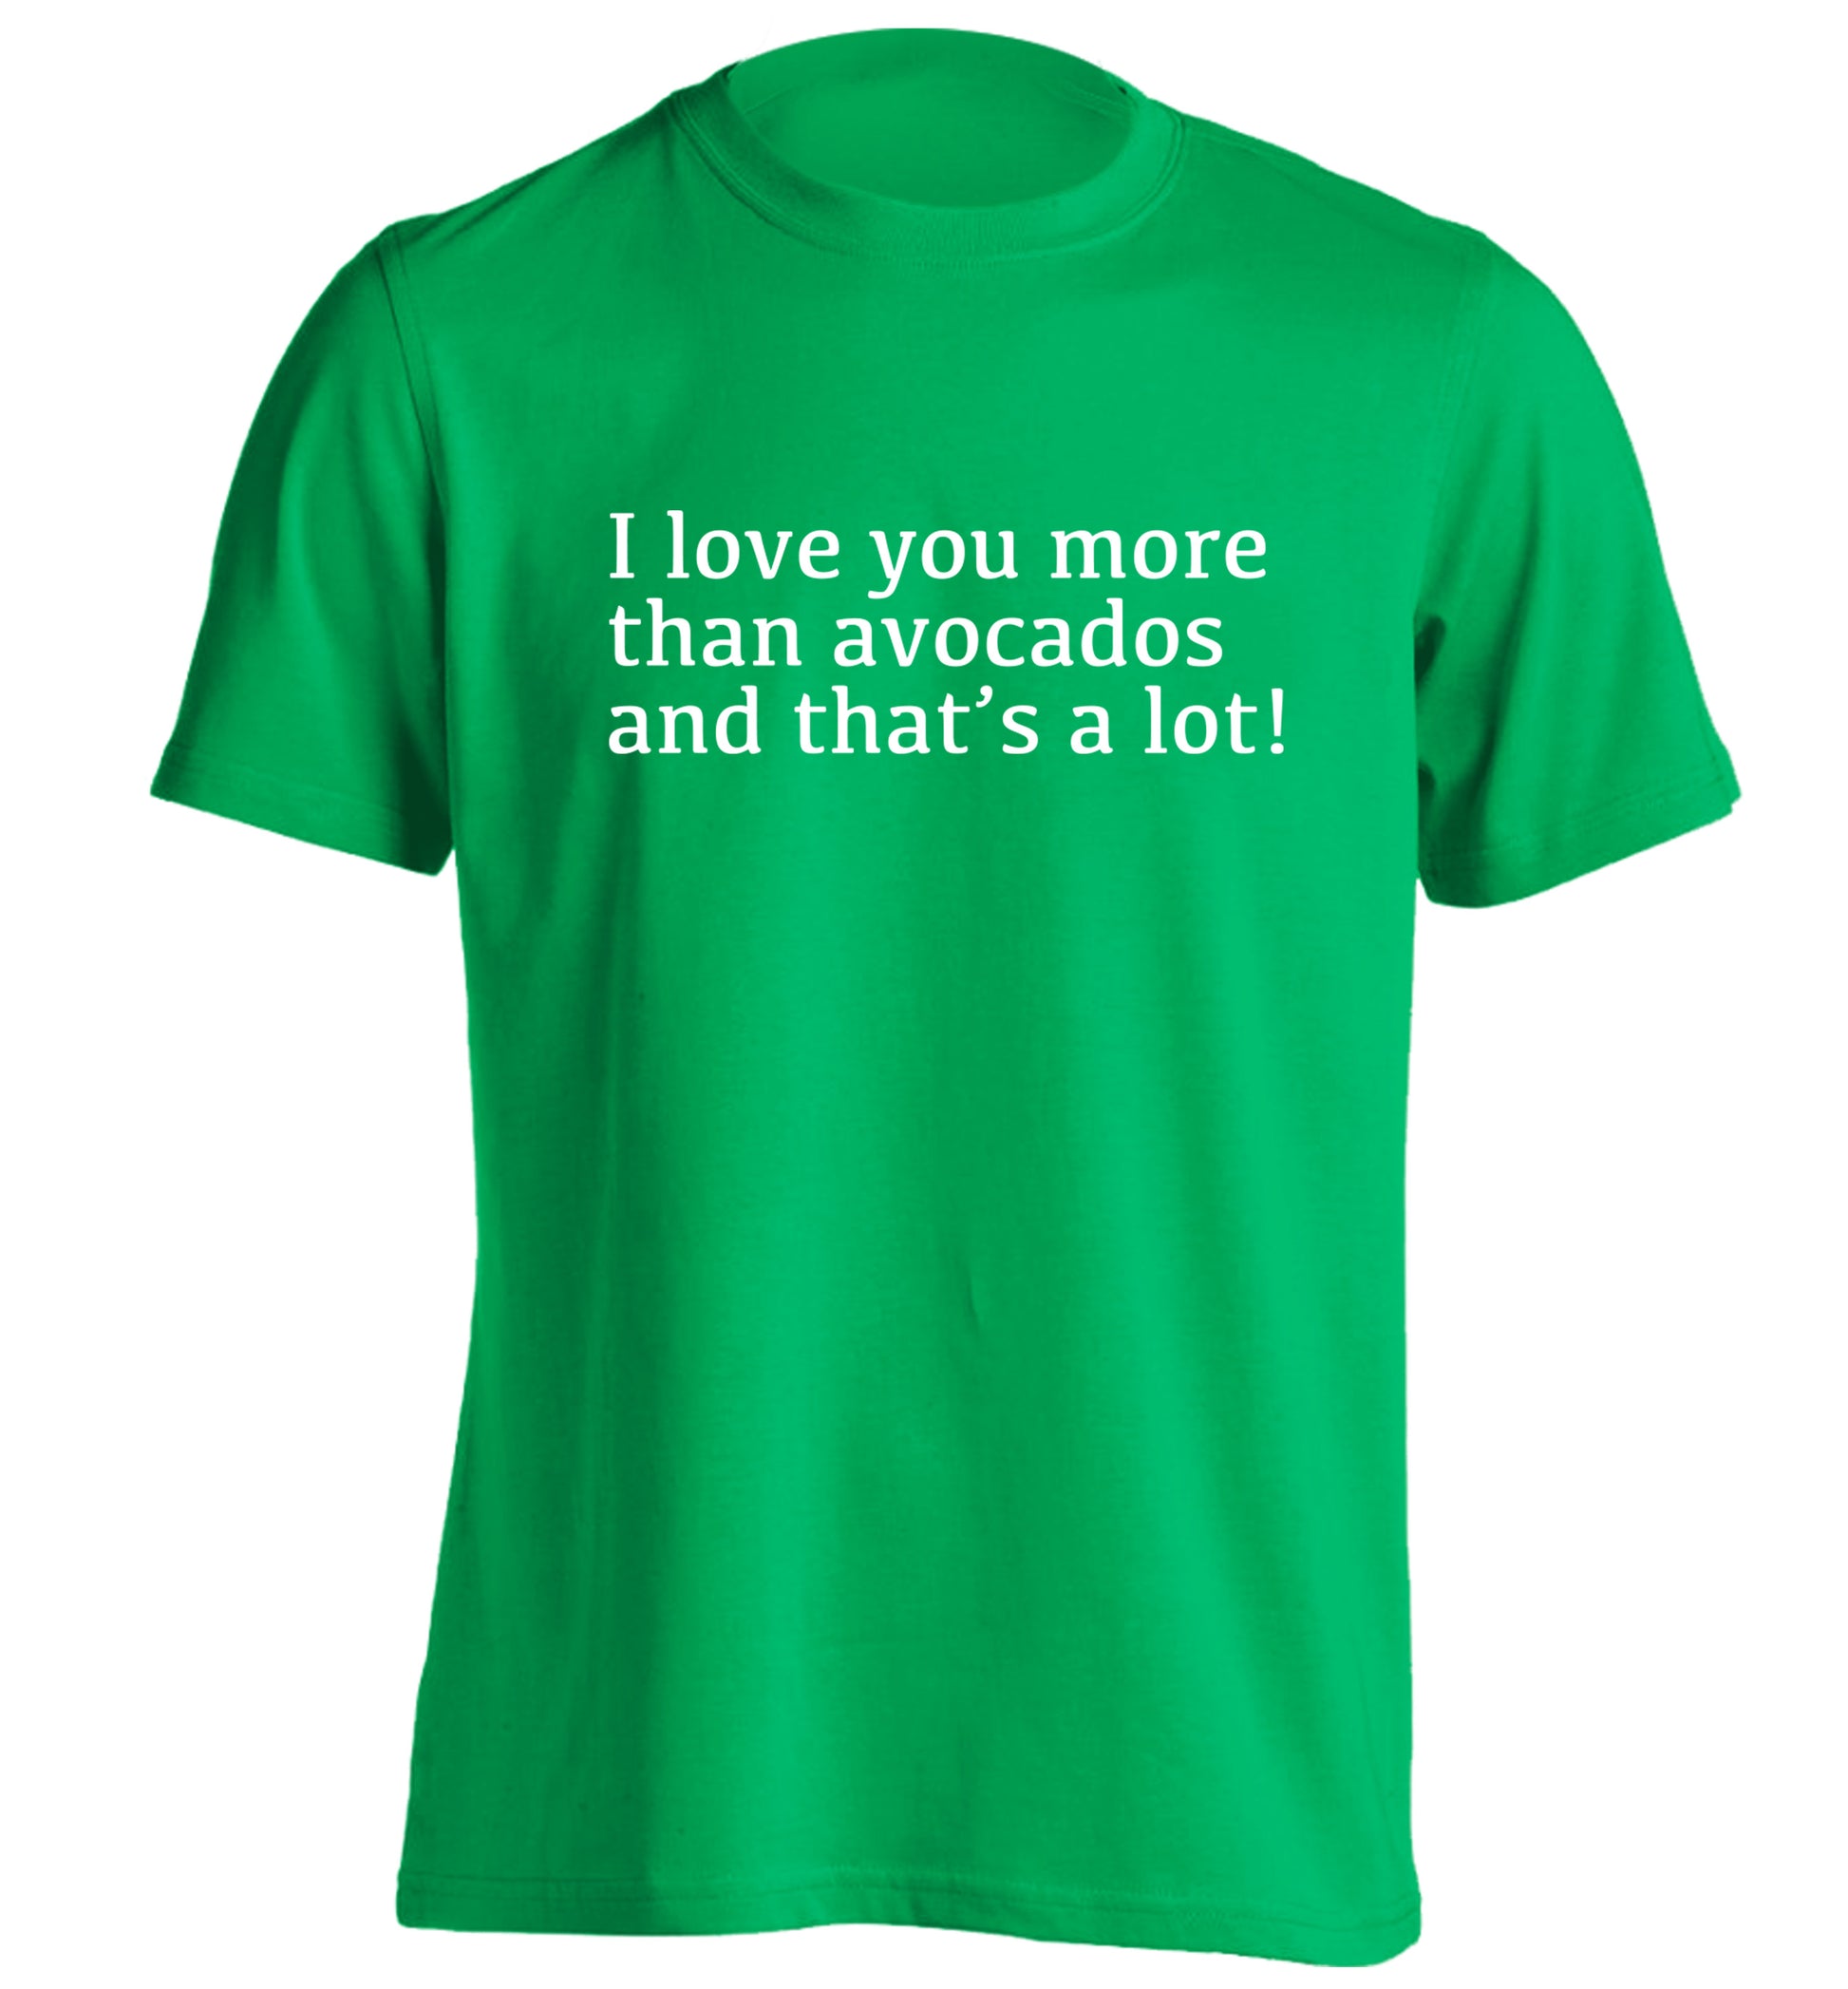 I love you more than avocados and that's a lot adults unisex green Tshirt 2XL